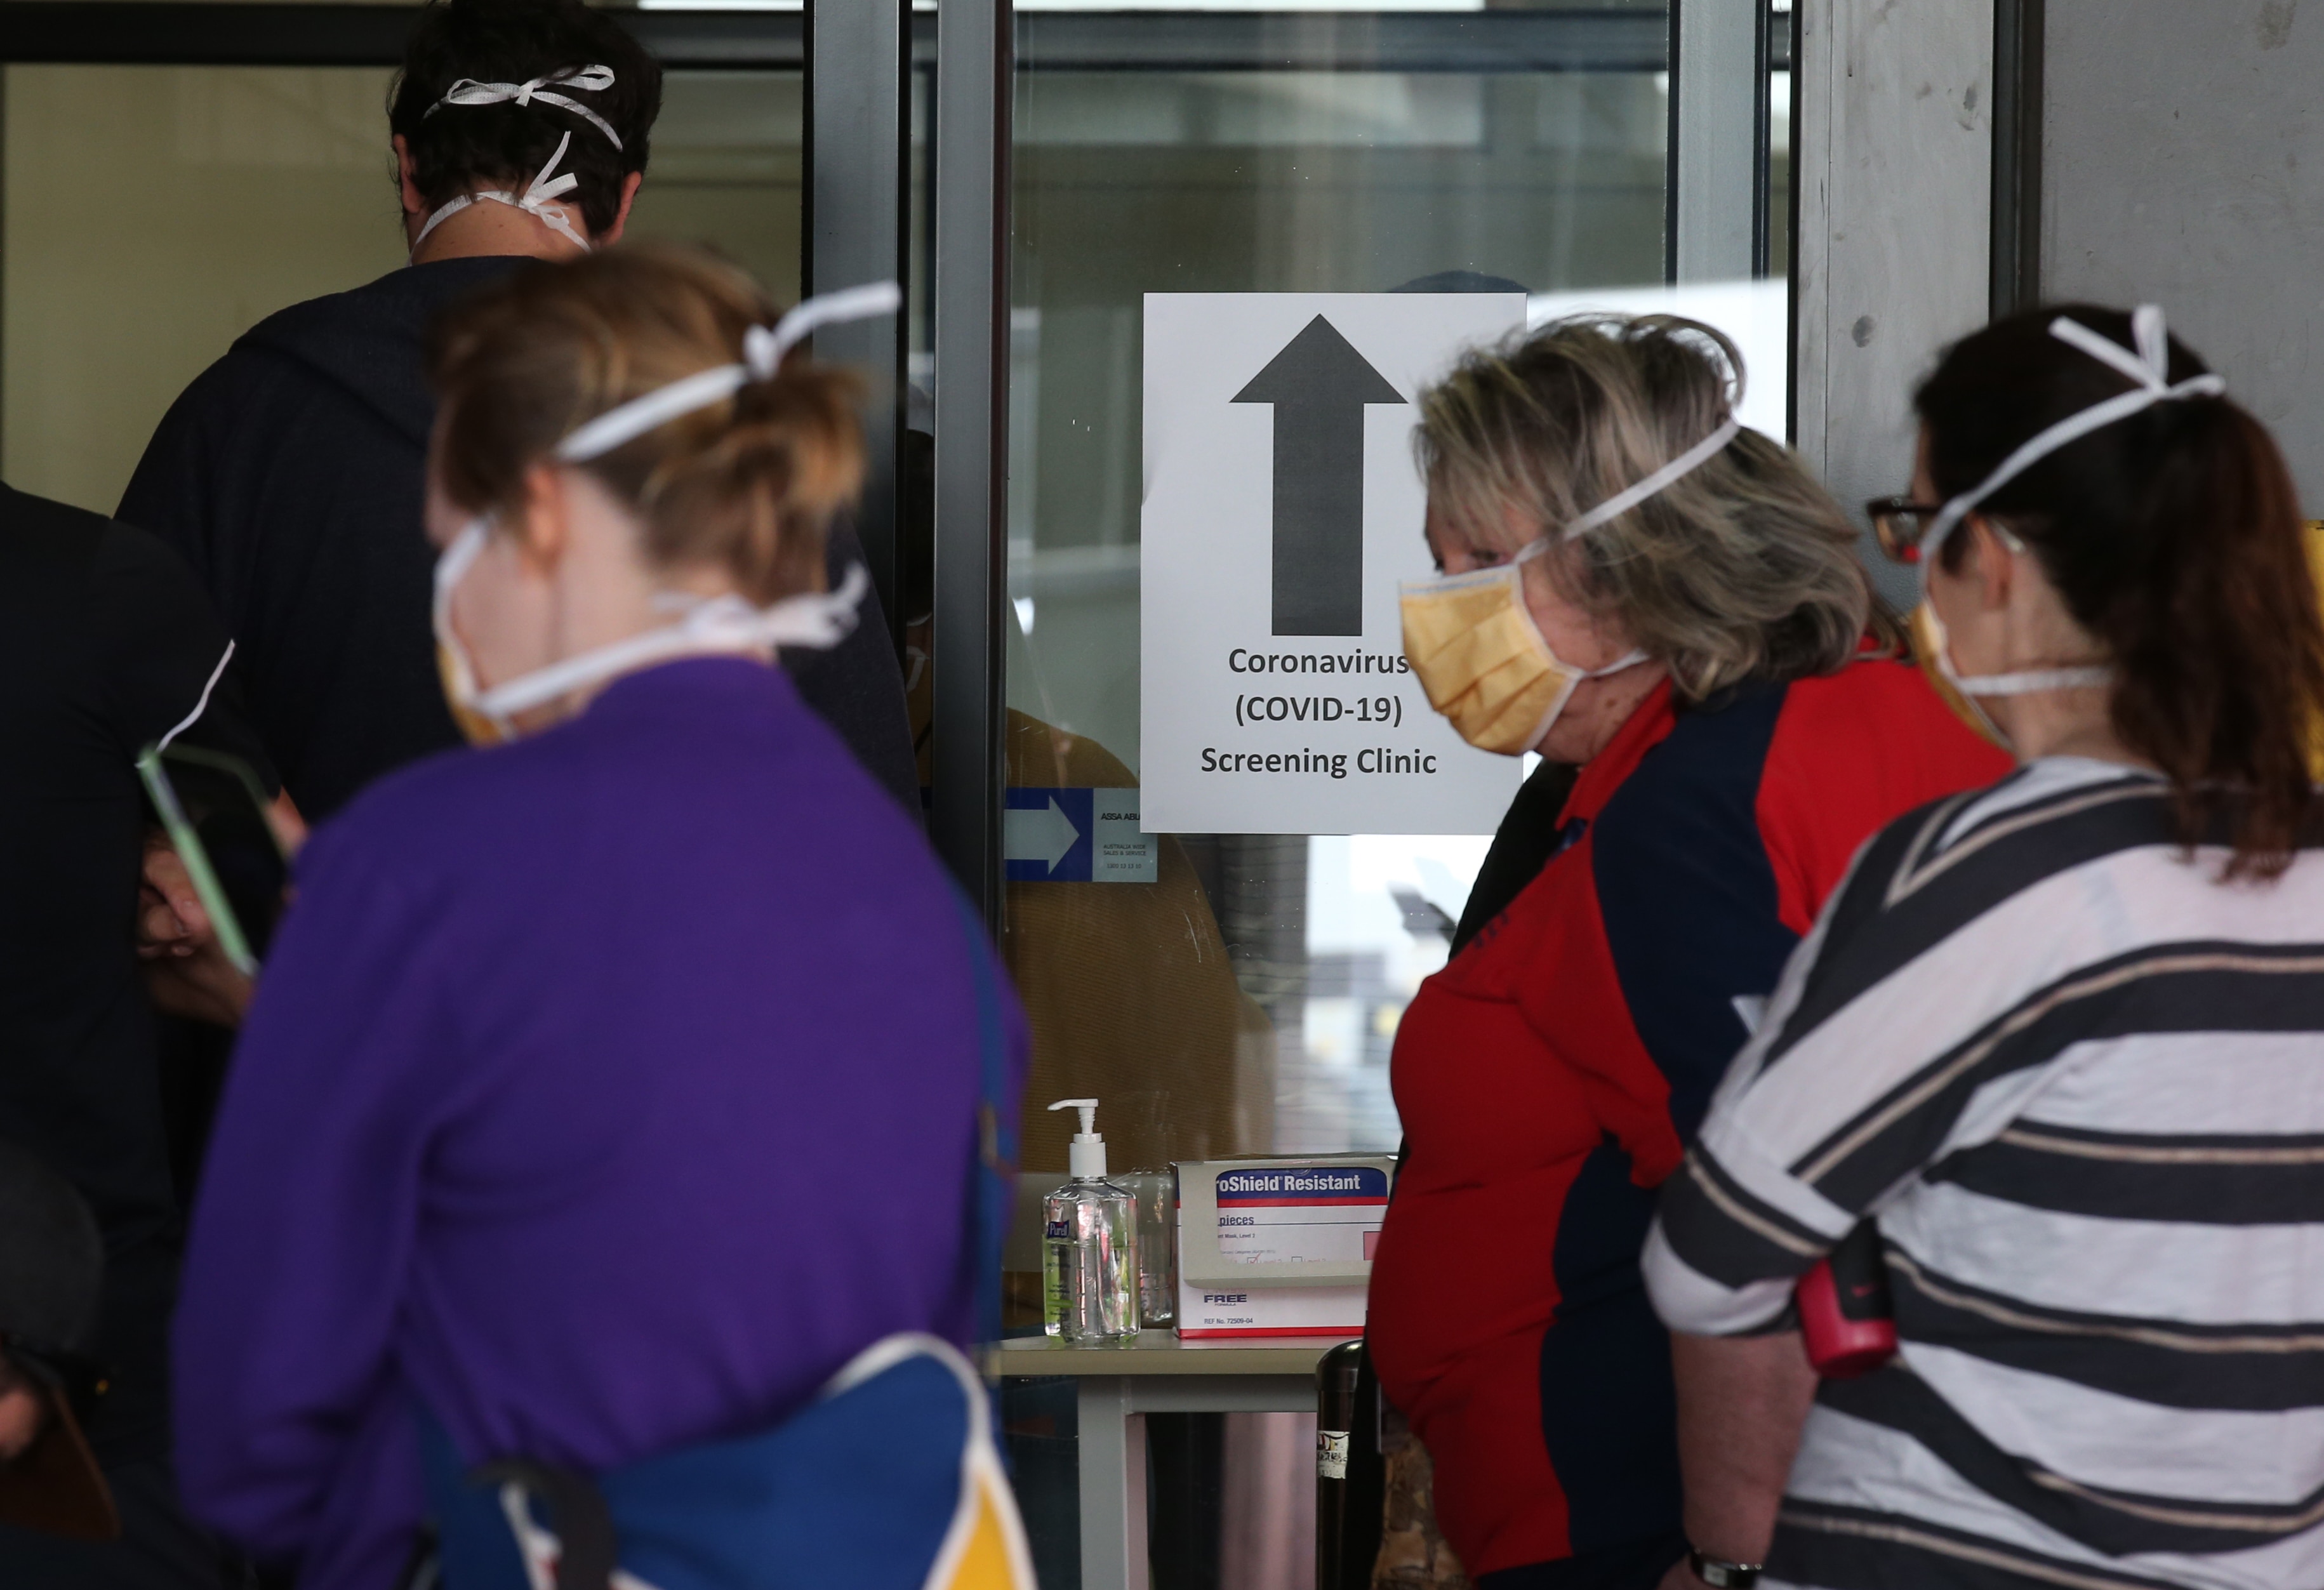 Patients line up at the Royal Melbourne Hospital for Coronavirus testing. Tuesday, 10 March, 2020.